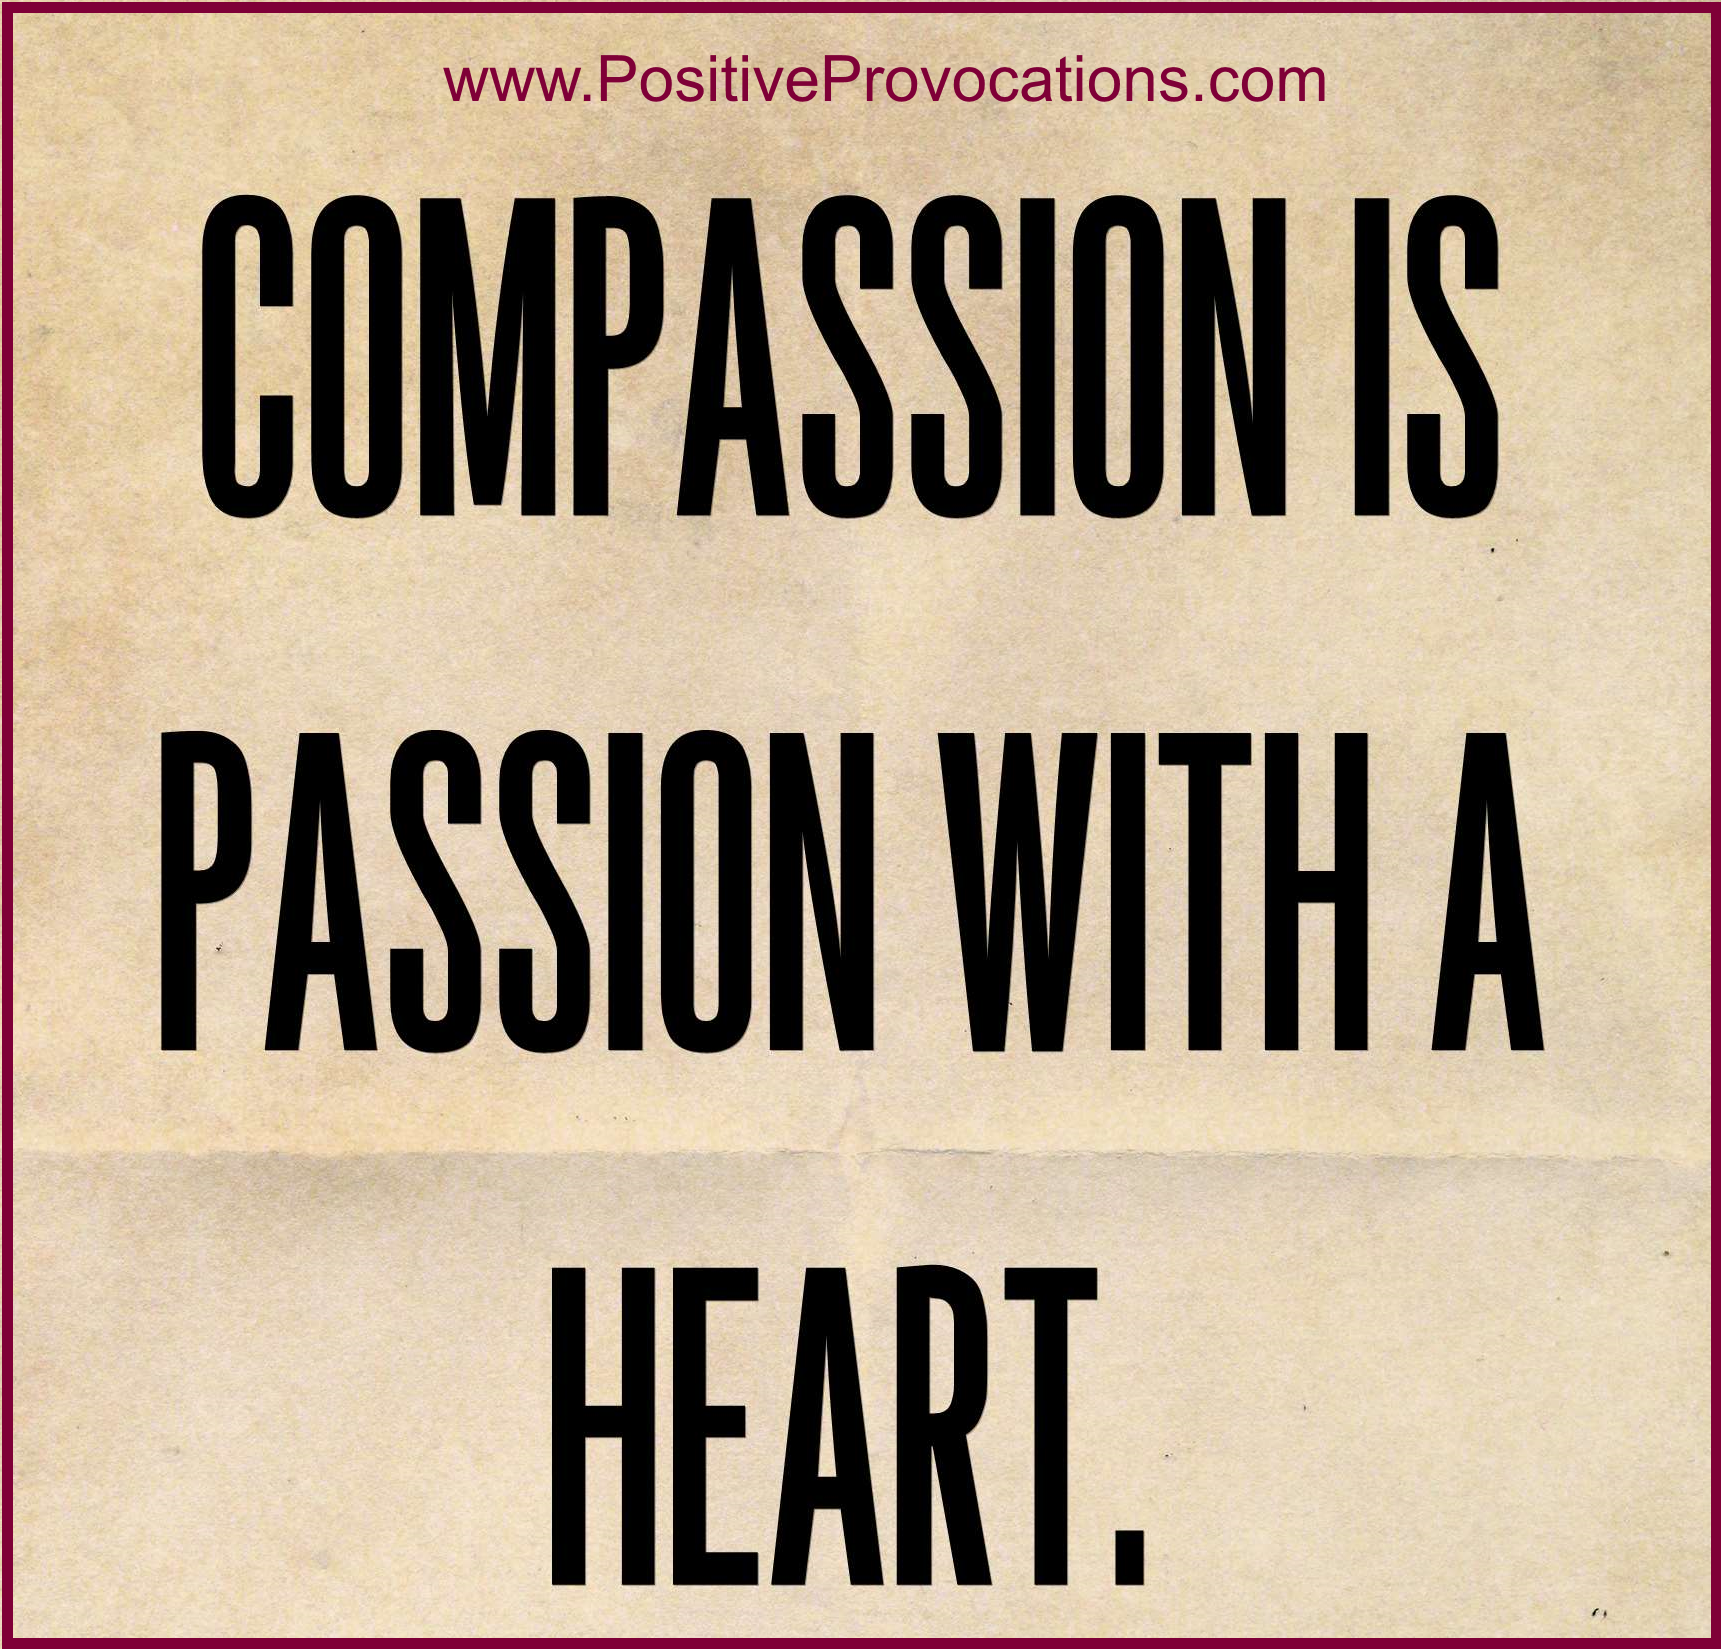 Compassion is passion with a heart